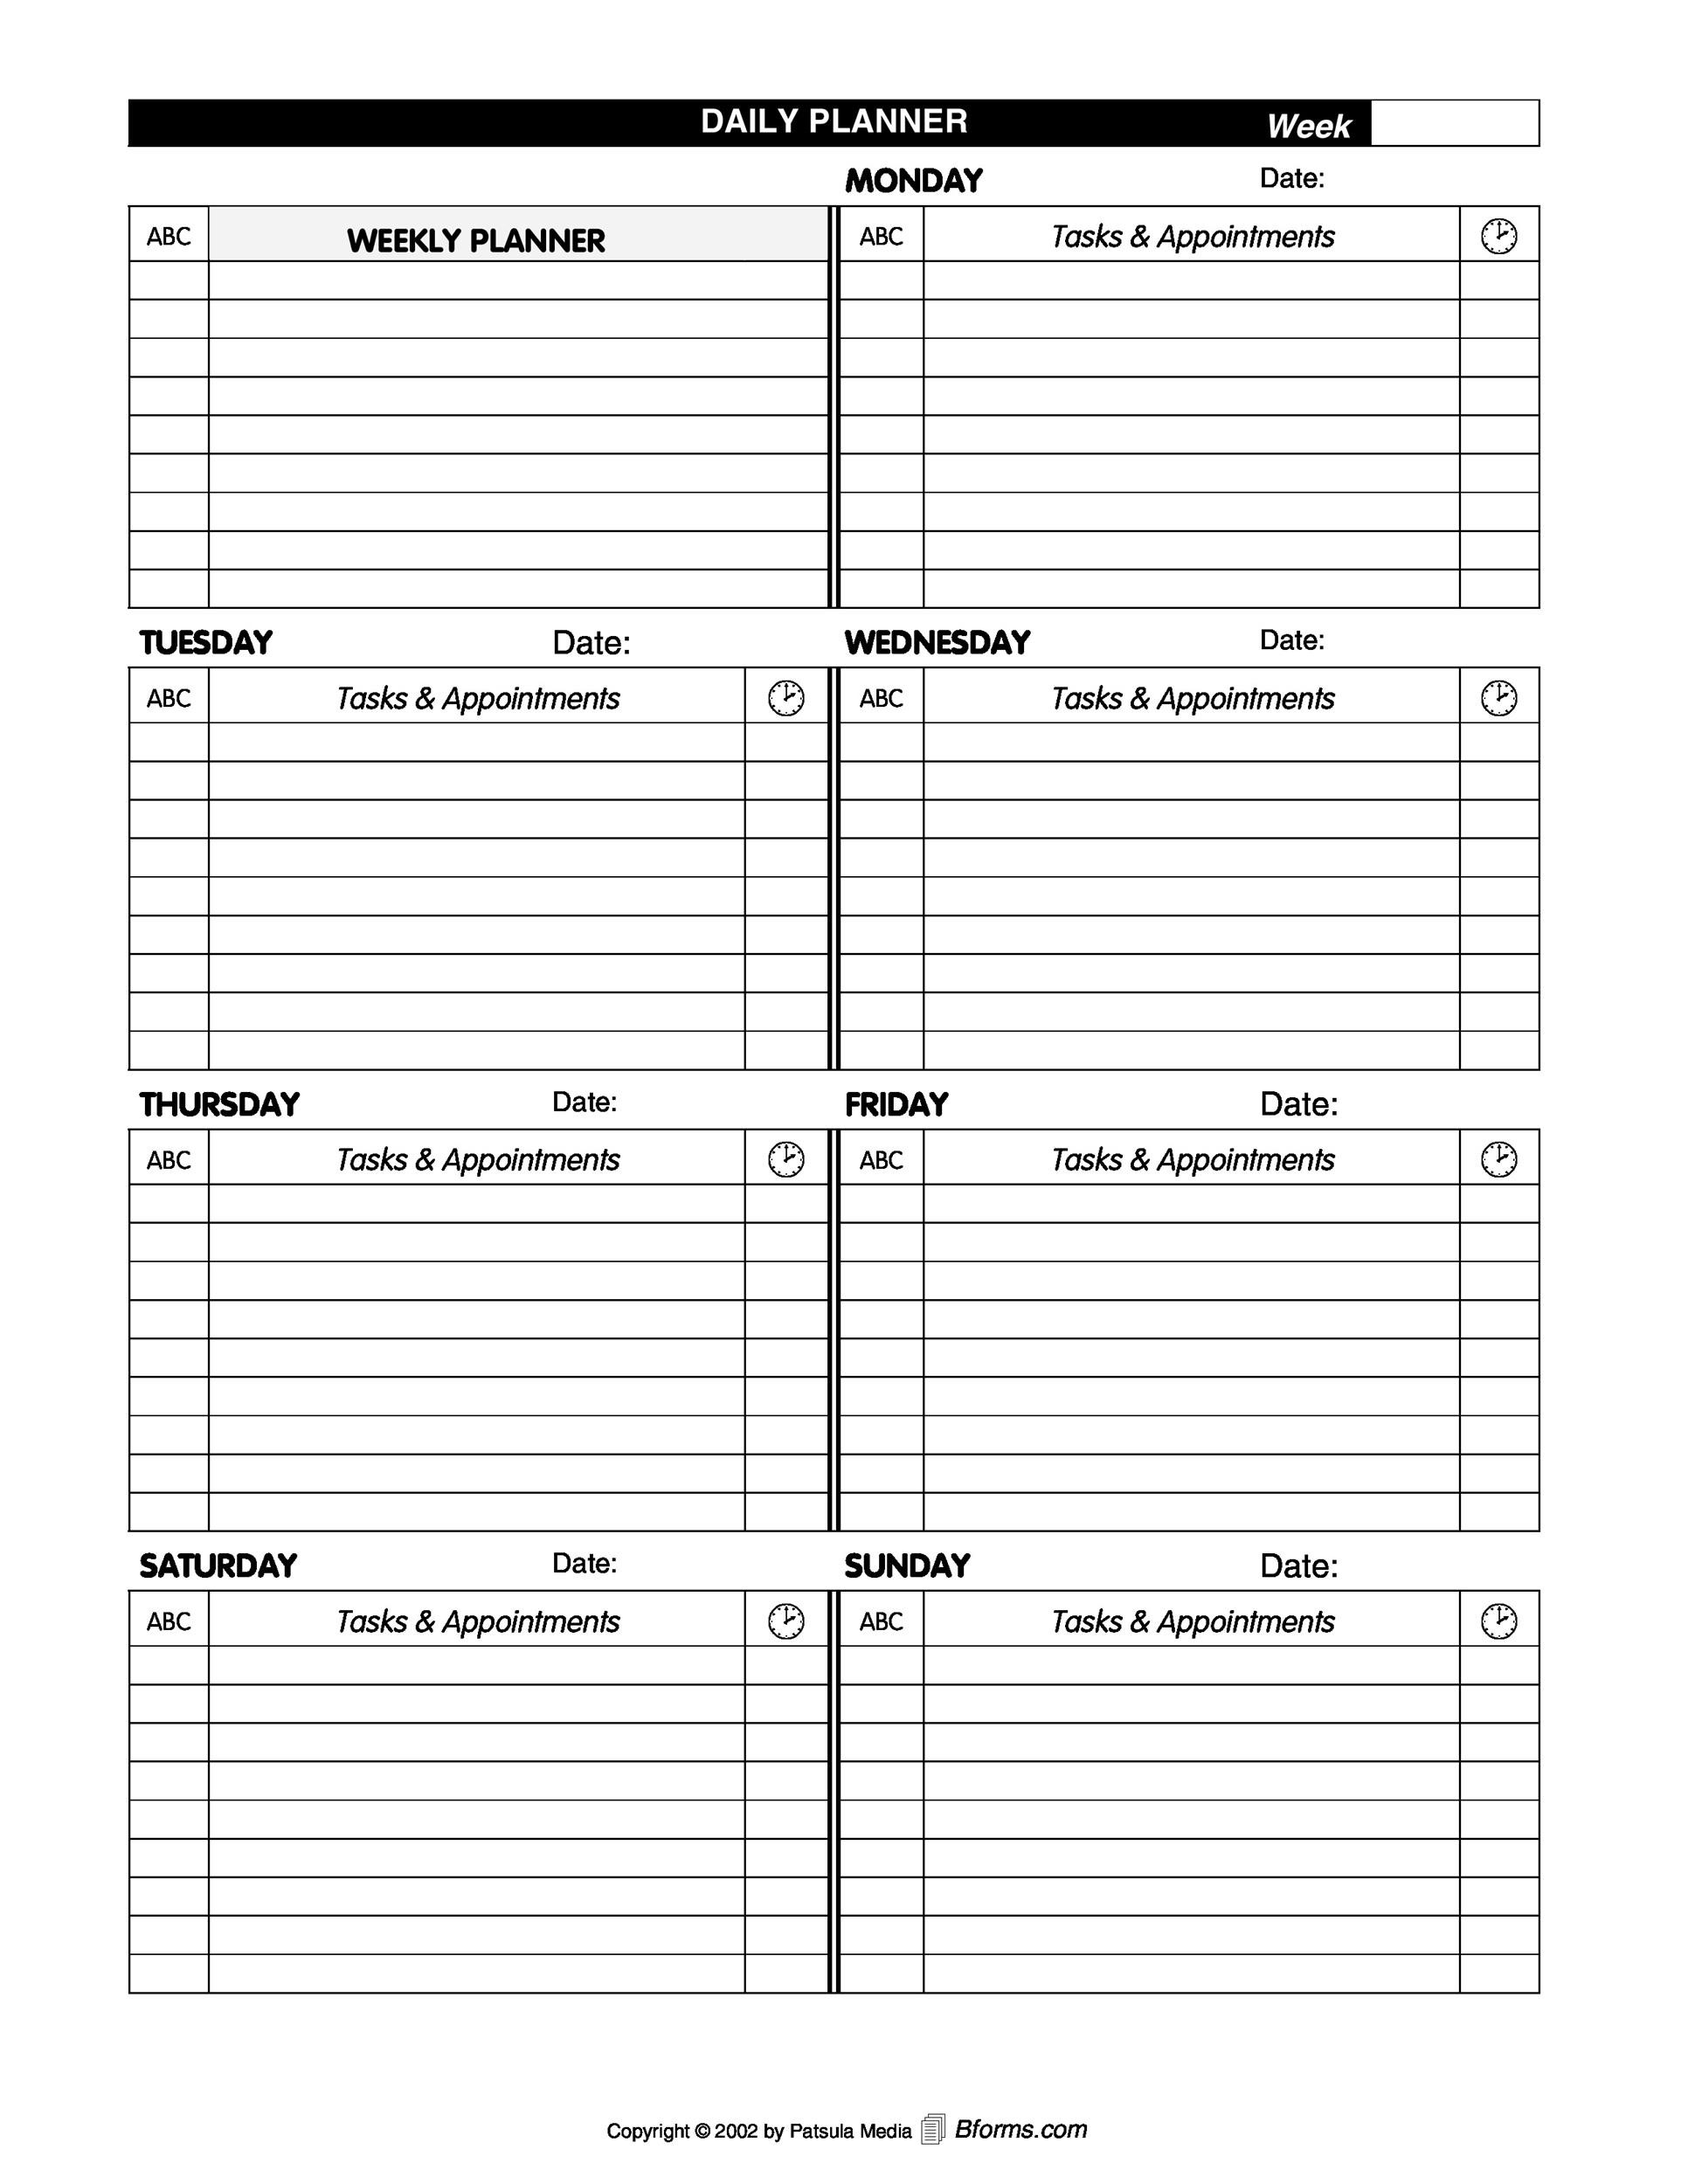 47 Printable Daily Planner Templates FREE in Word Excel PDF 